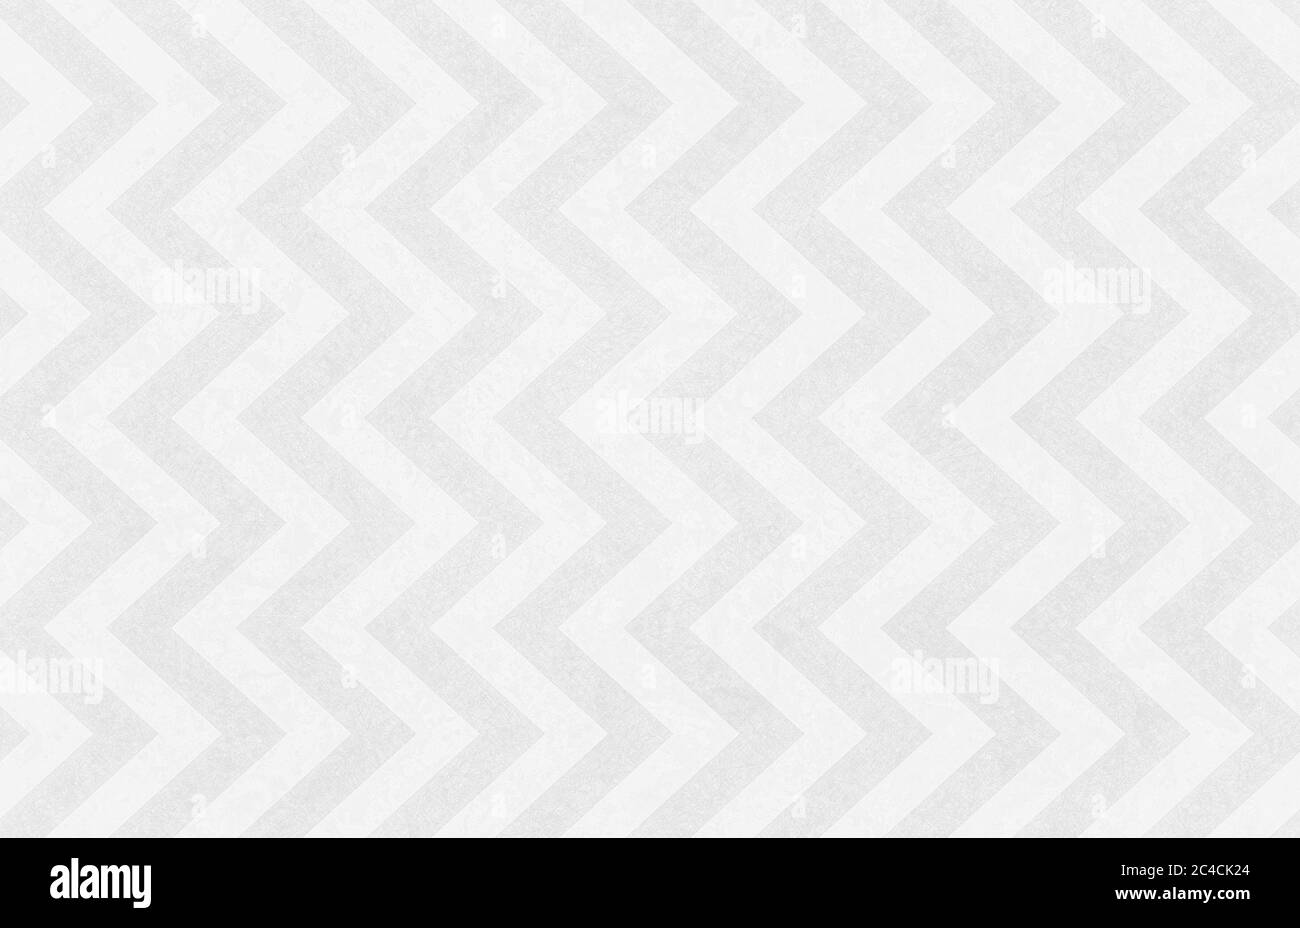 Chevron striped background pattern in textured nostalgic white and gray design with faint texture, old vintage paper background Stock Photo